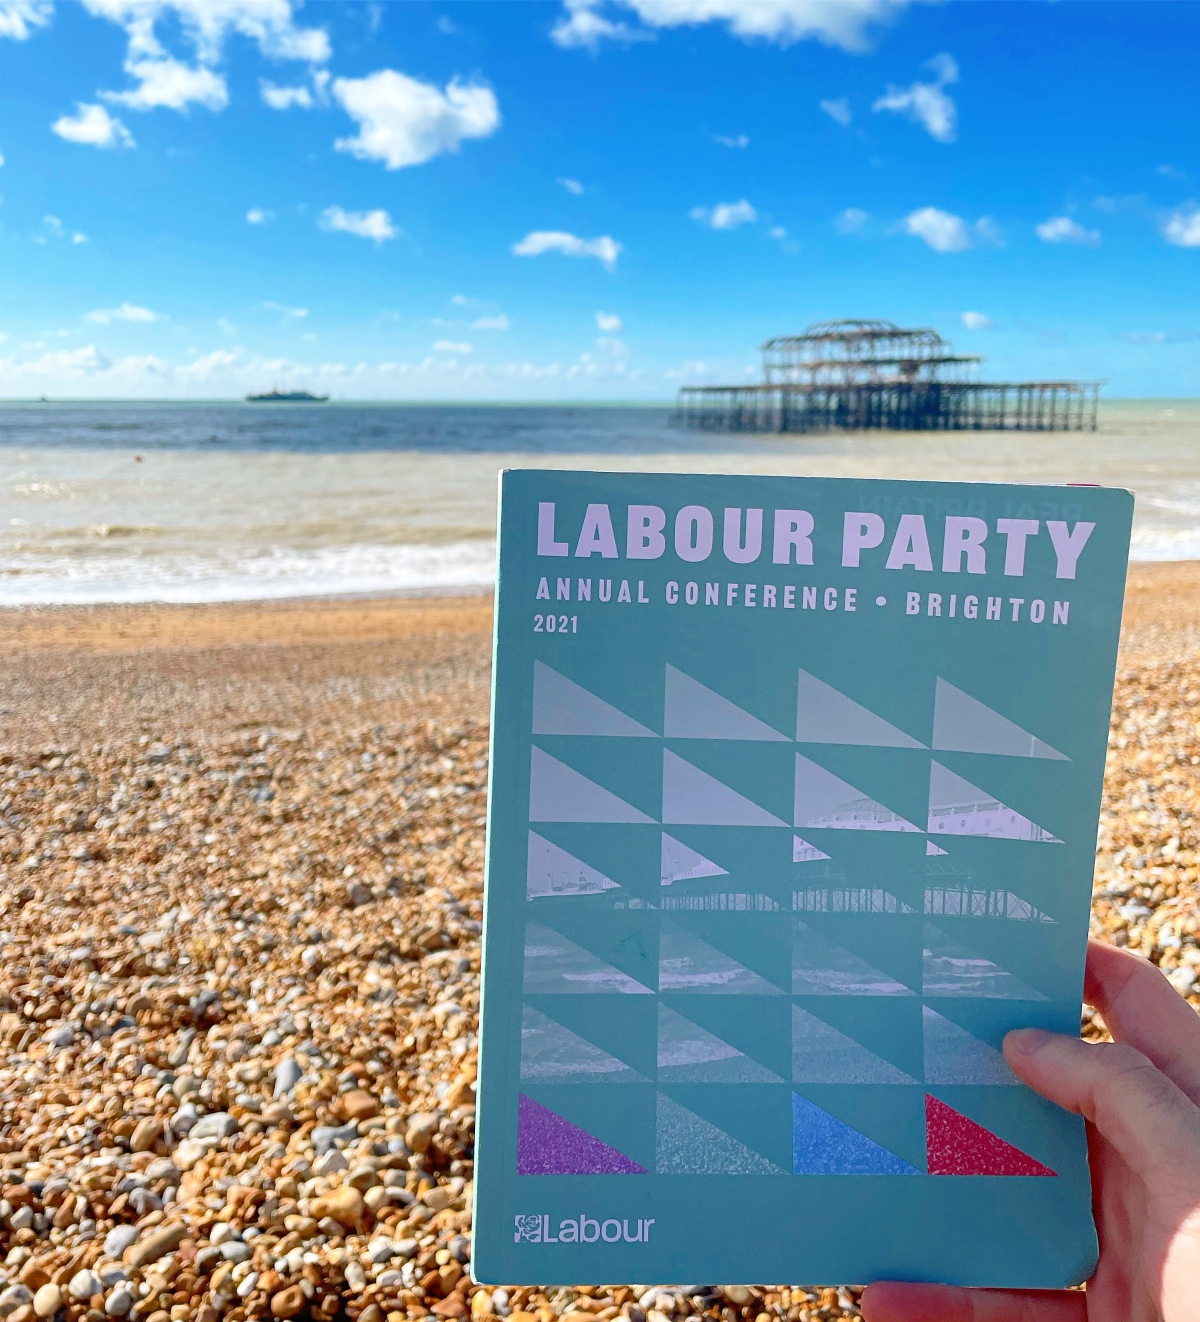 Reflections from Labour Party Conference 2021